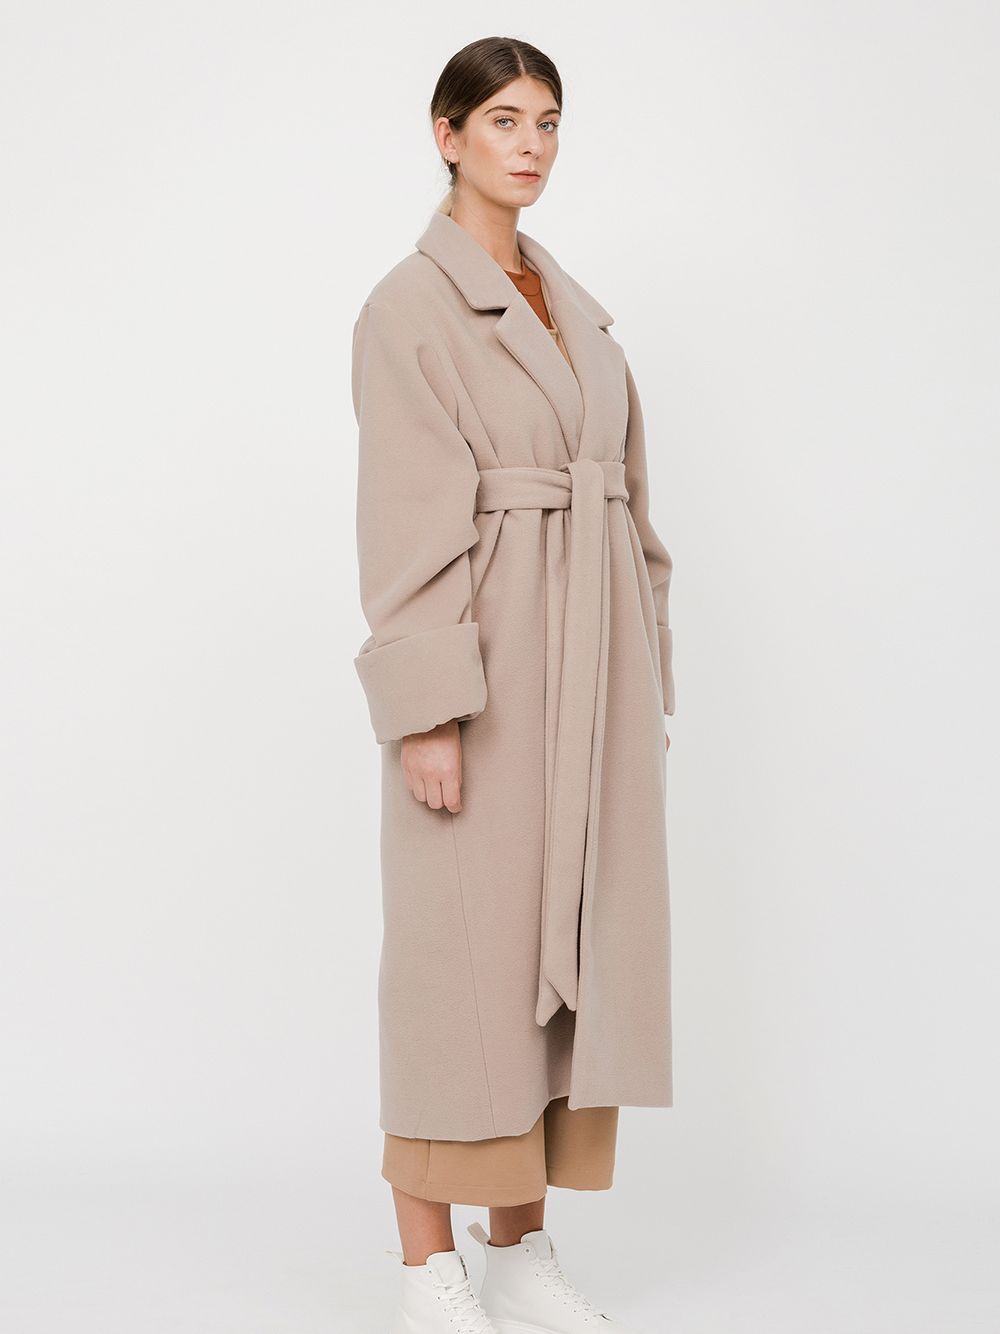 Frederica's Timeless Coat Bege